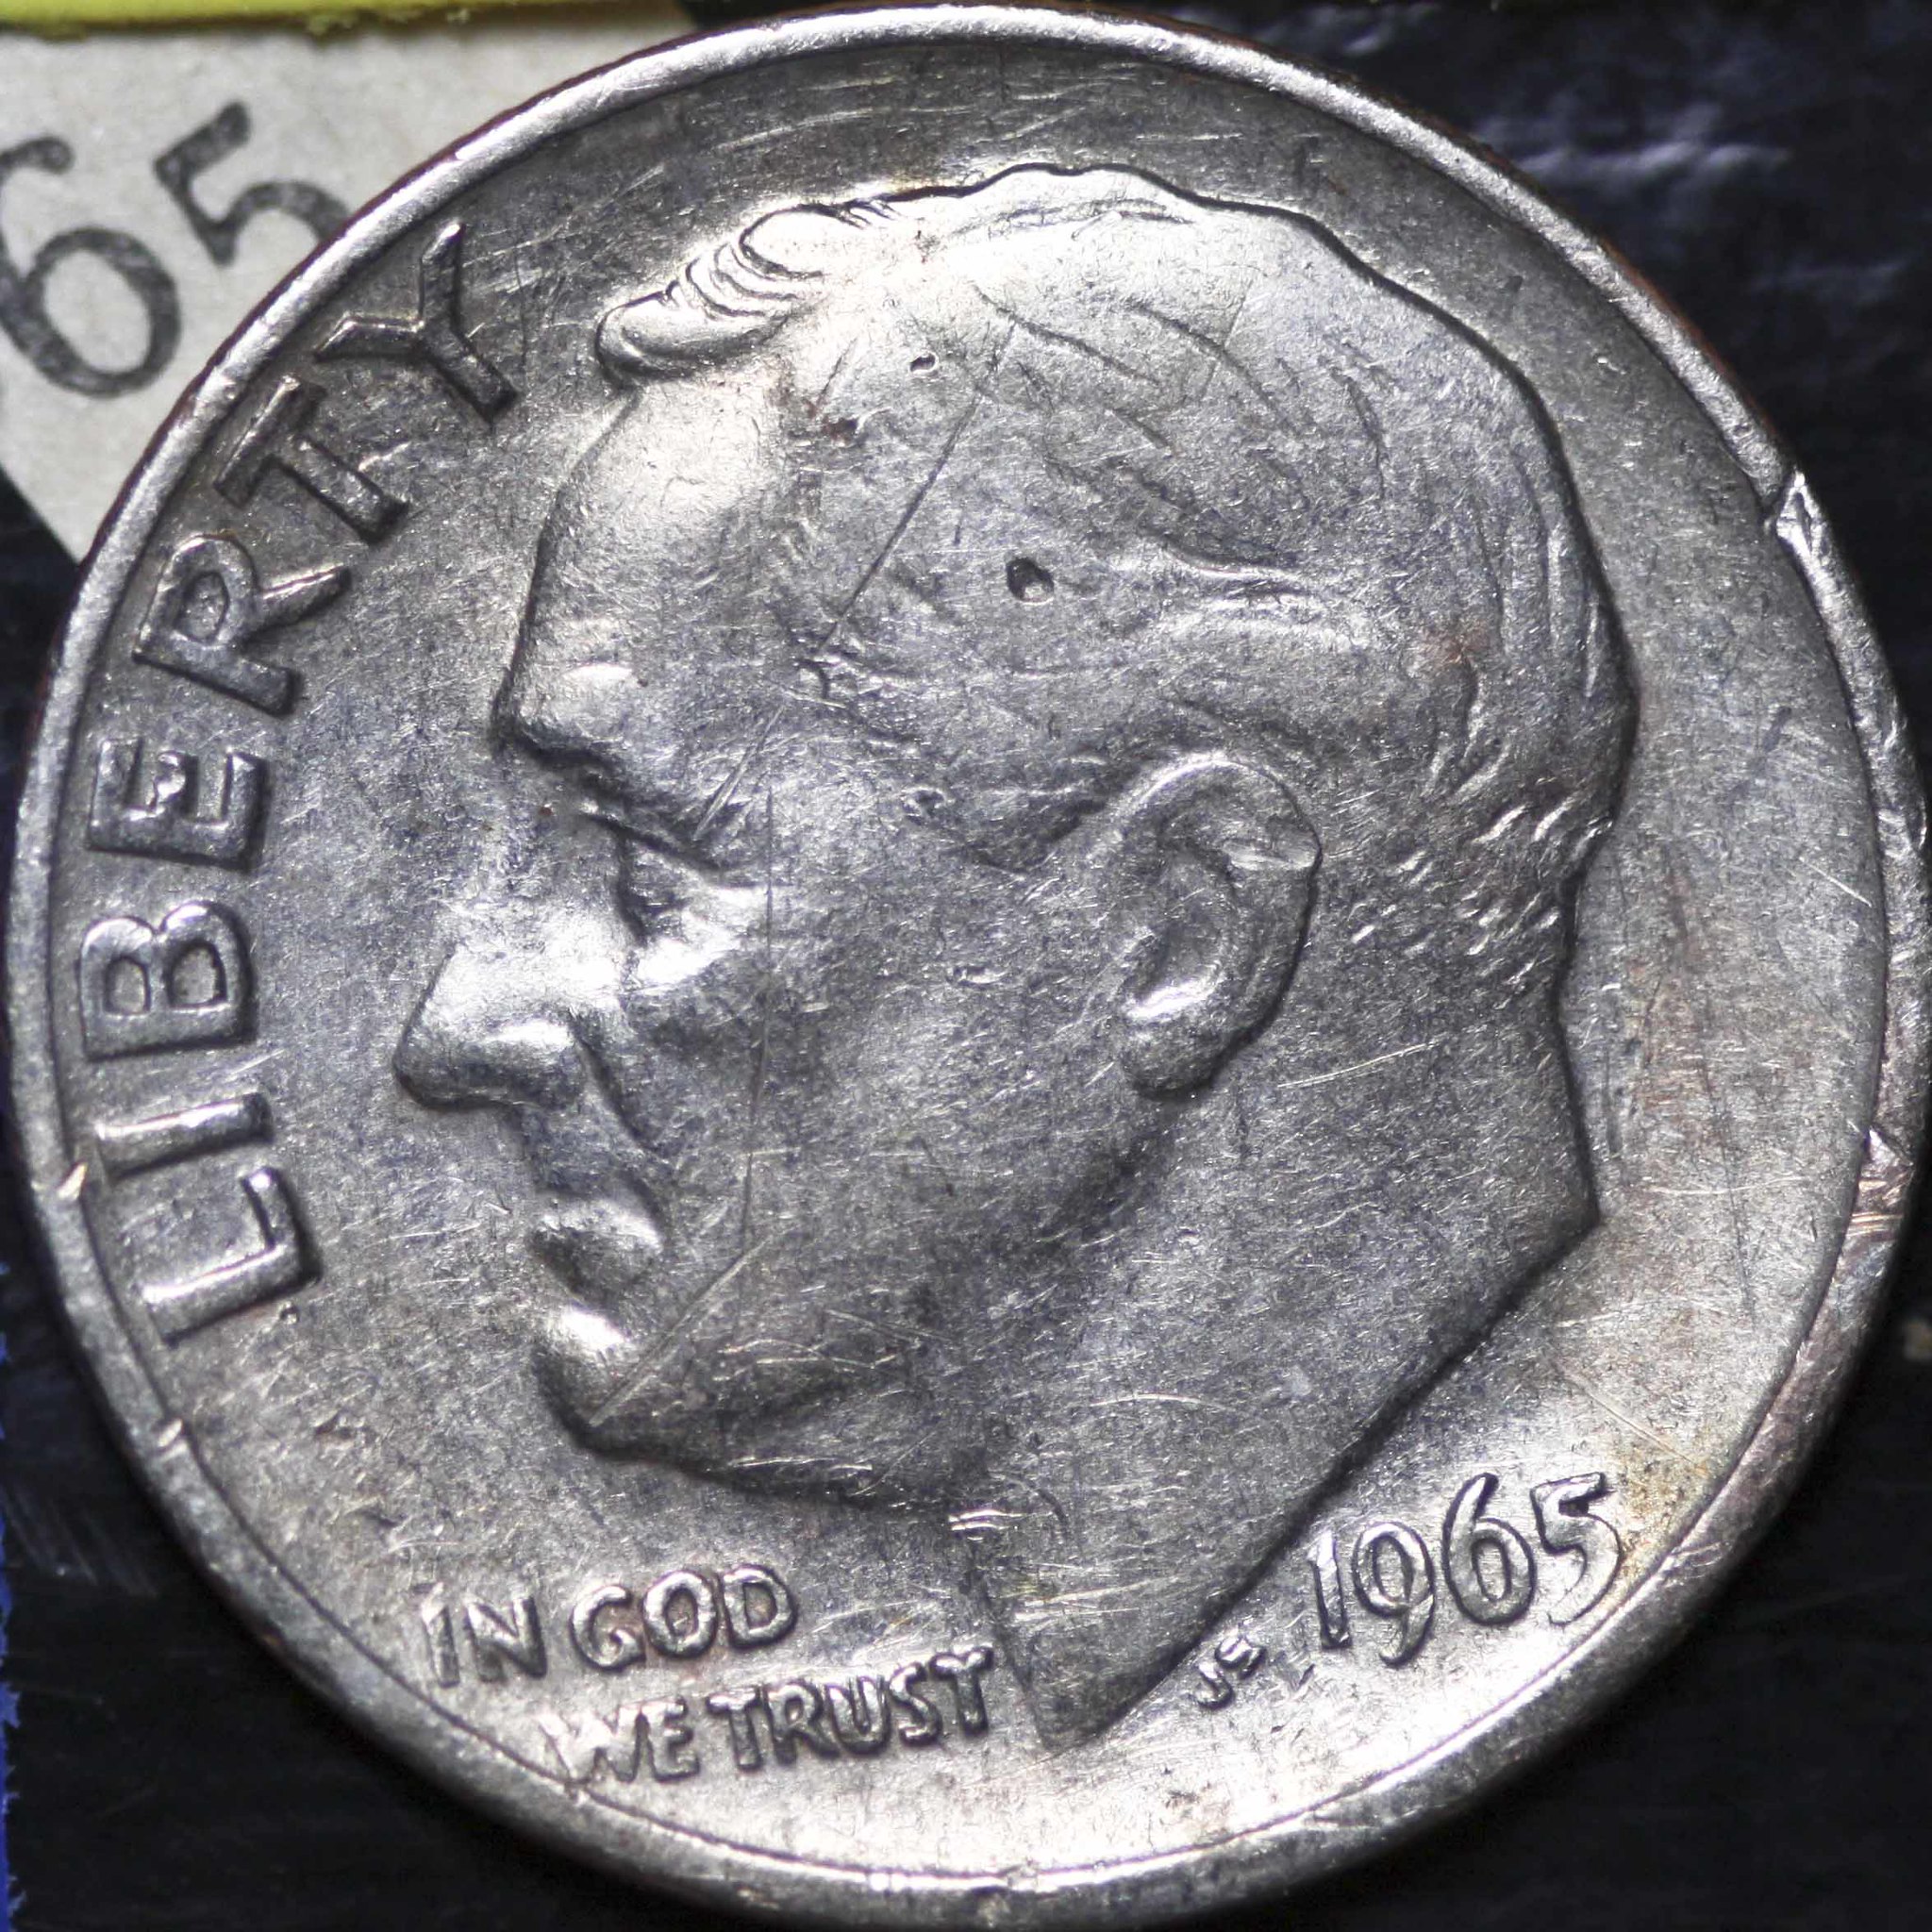 1965 Dime Error Do You Have This Rare Silver Dime The U S Coins Guide,Types Of Onions In India